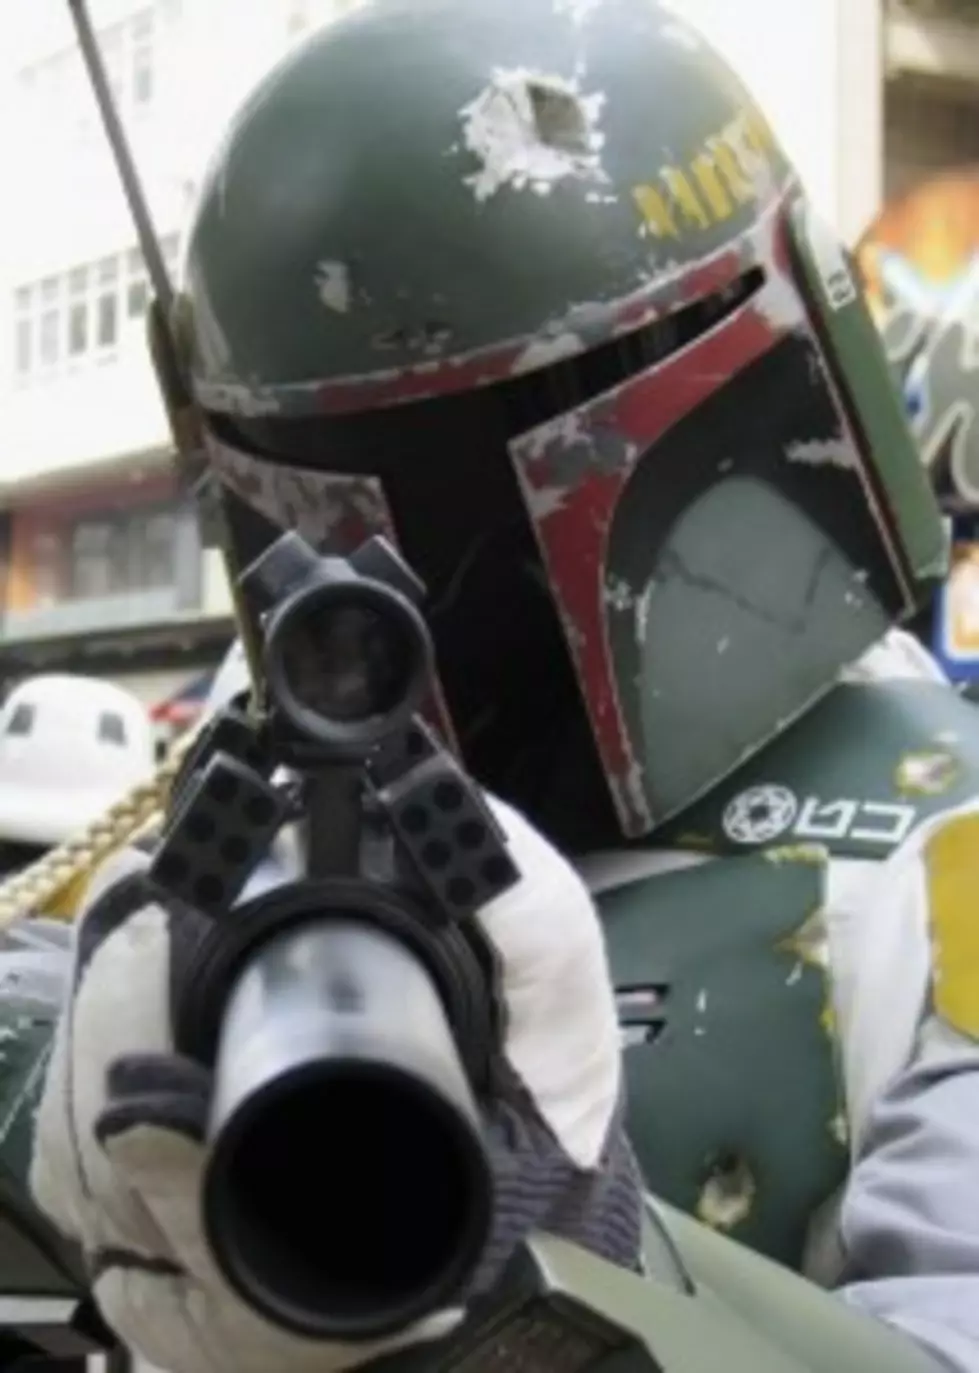 Boba Fett Arrested on Abuse Charges